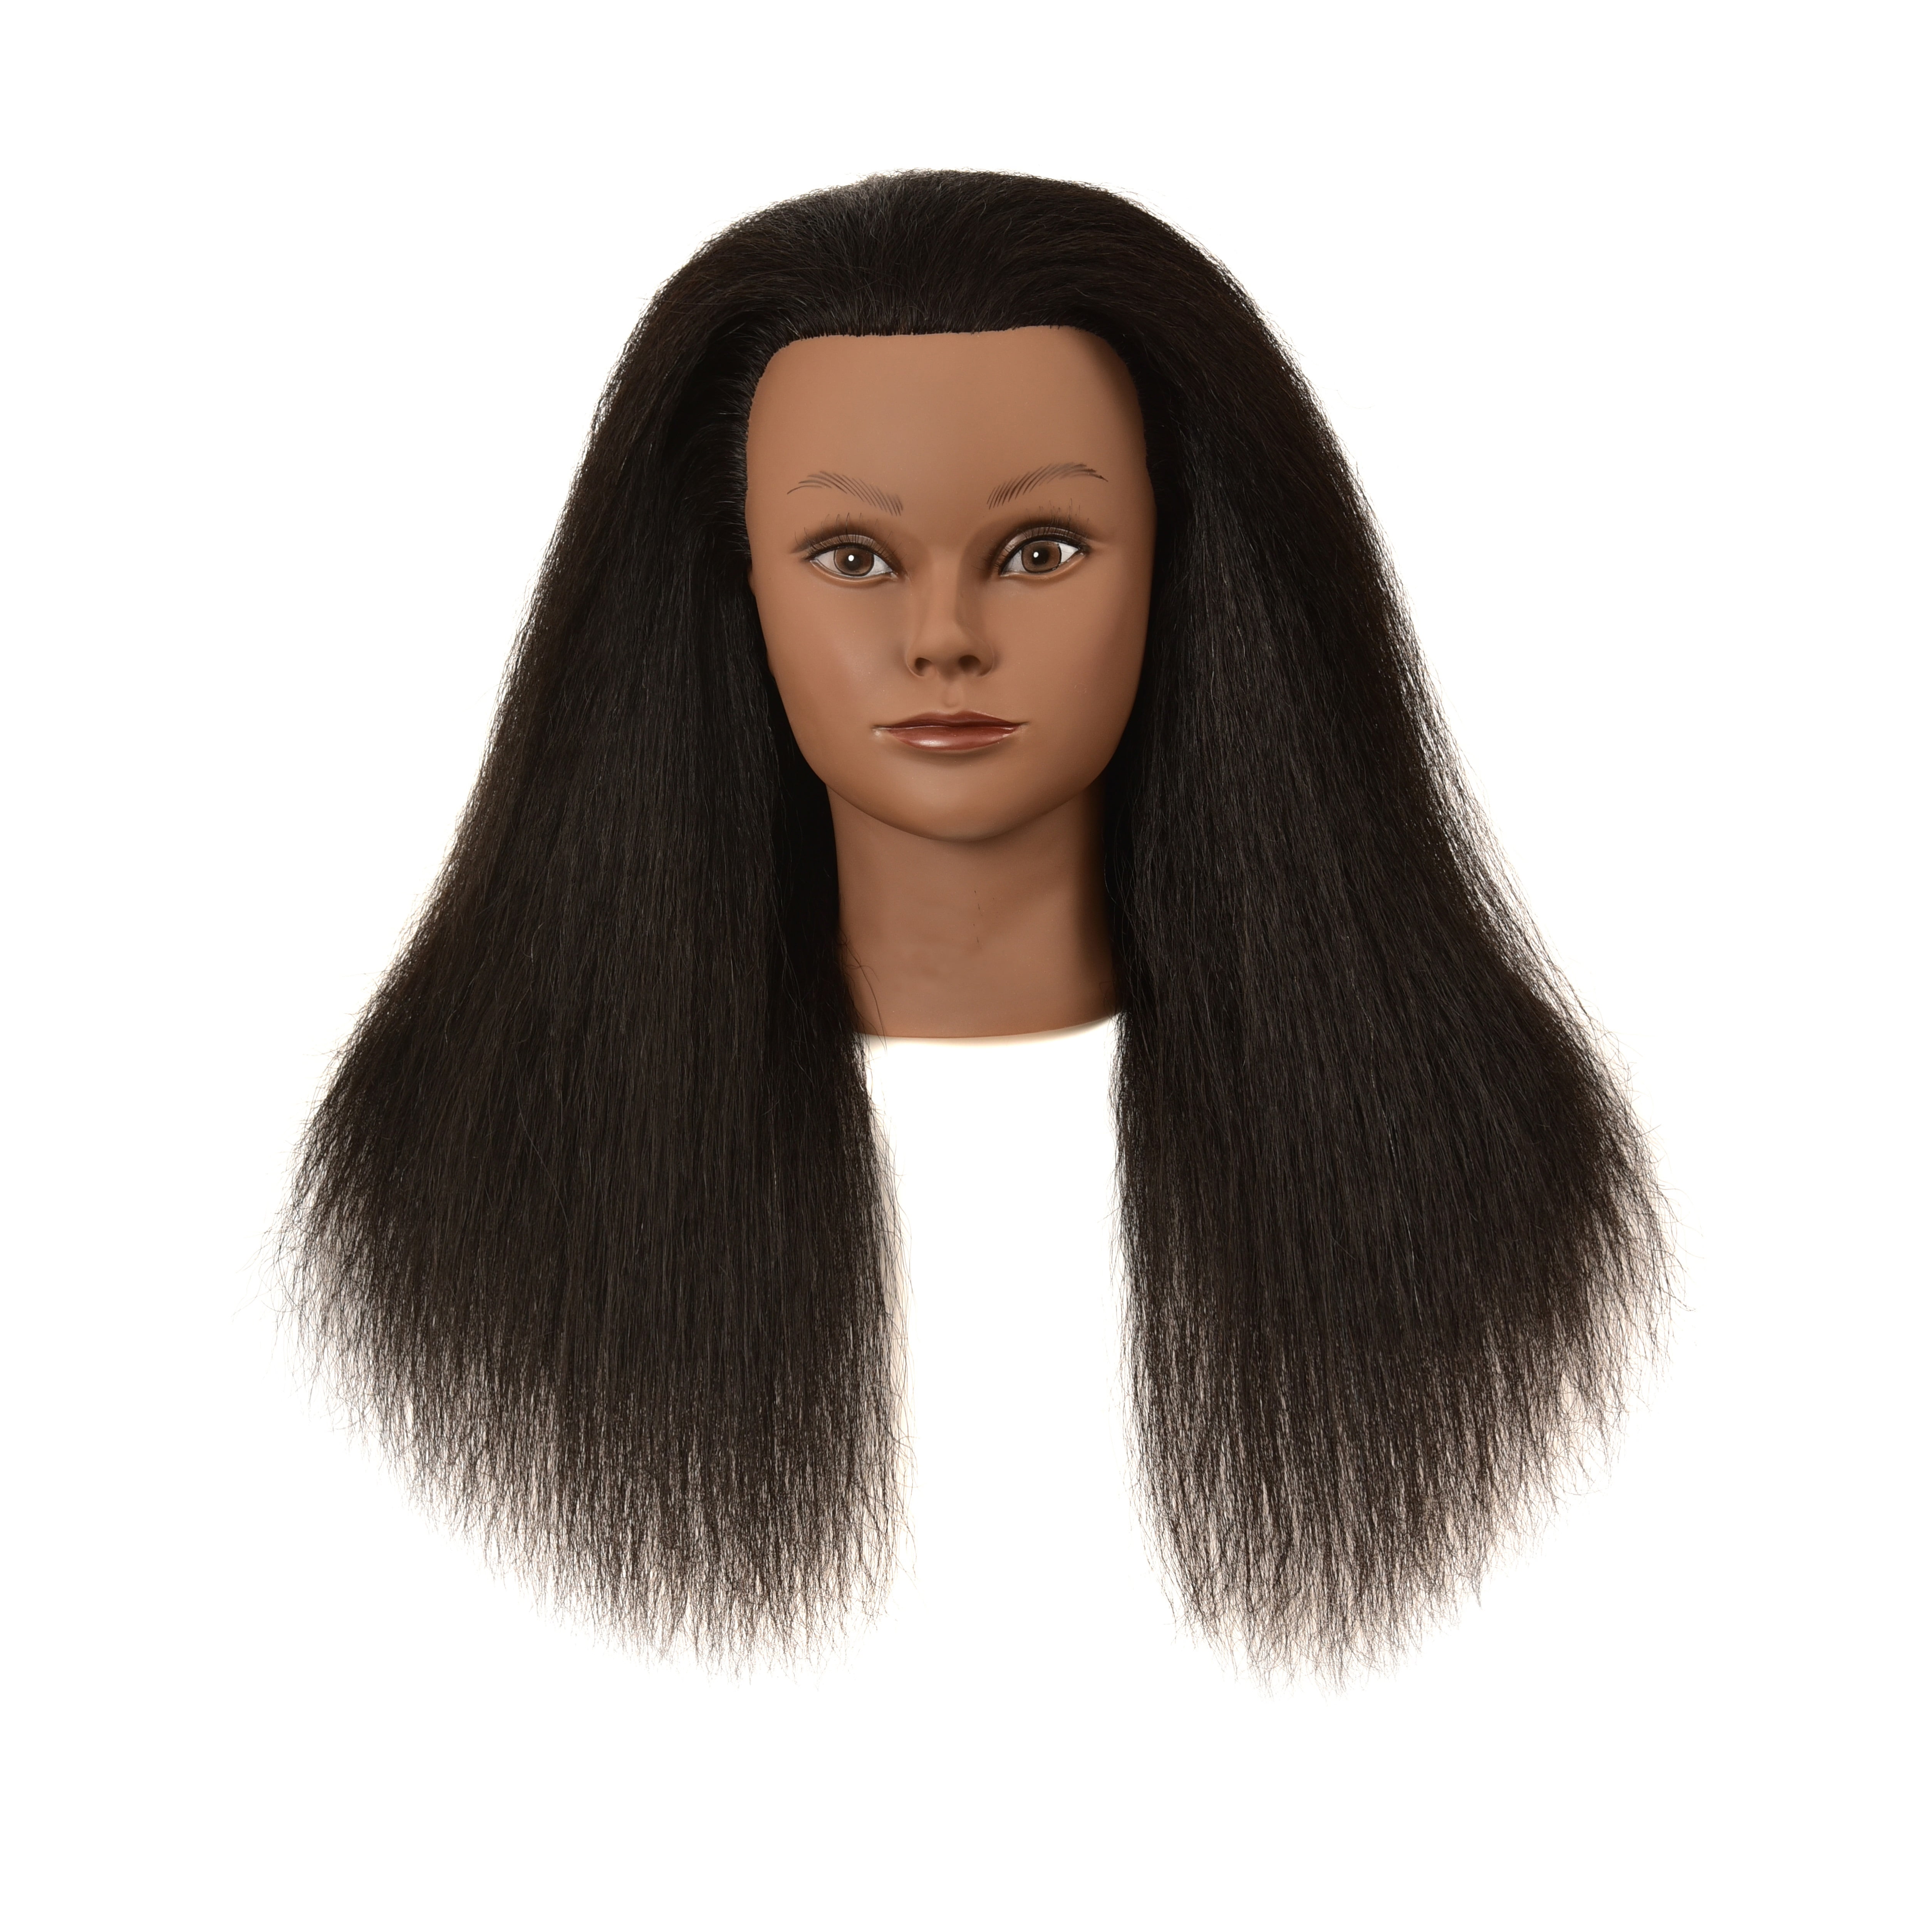 Afro Mannequin Head with 100% Human Hair Cosmetology Doll Head Hairdre –  Xtrend Hair